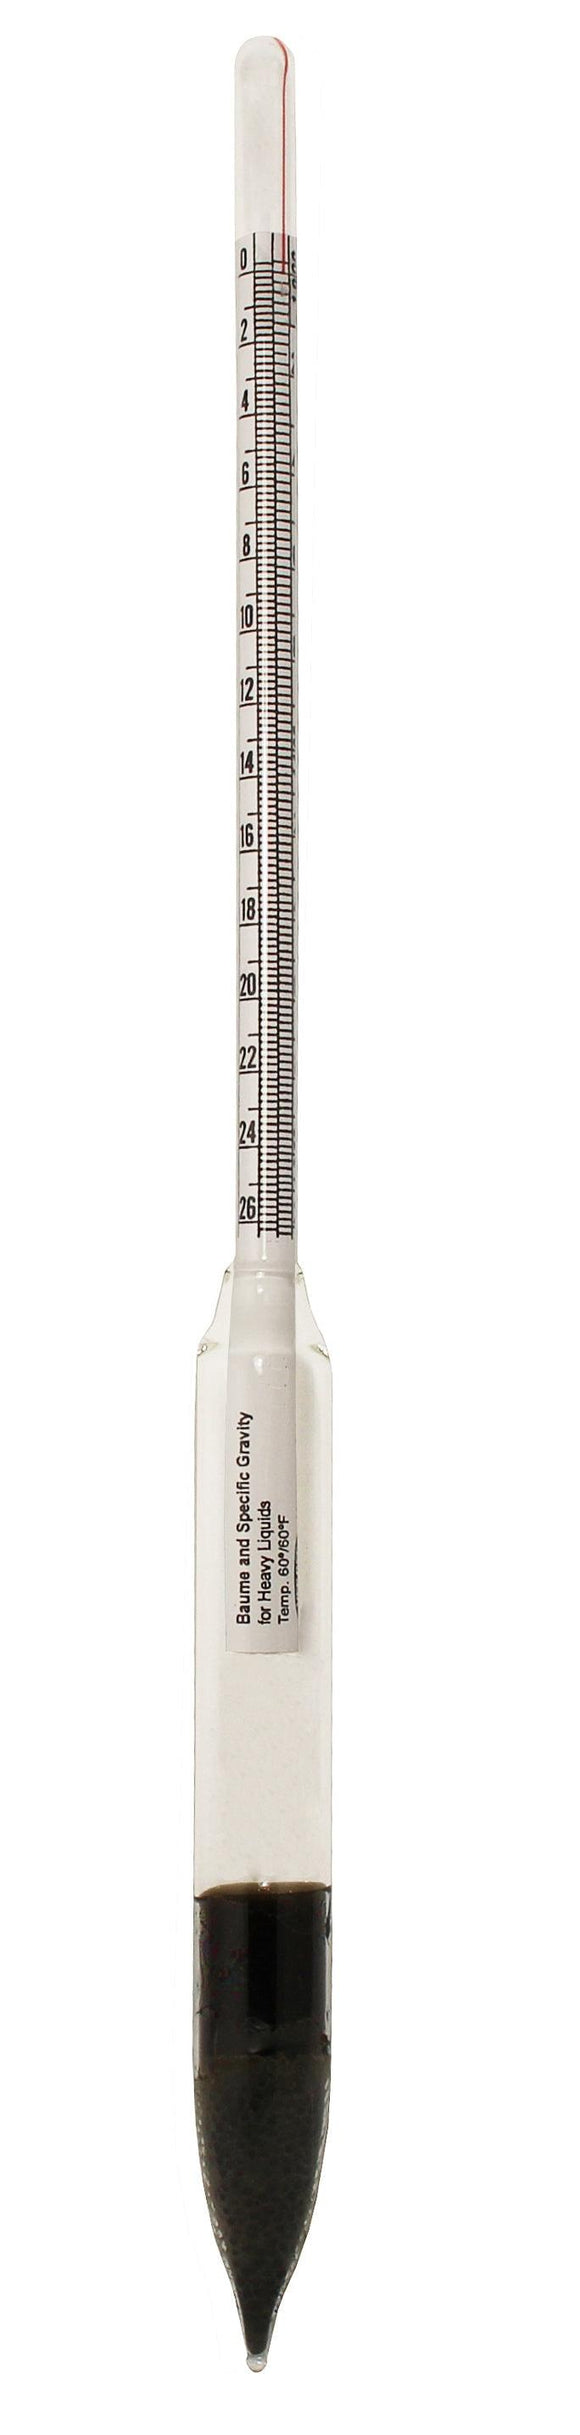 Specific Gravity / Baume Dual Scale Hydrometers from VEE GEE Scientific